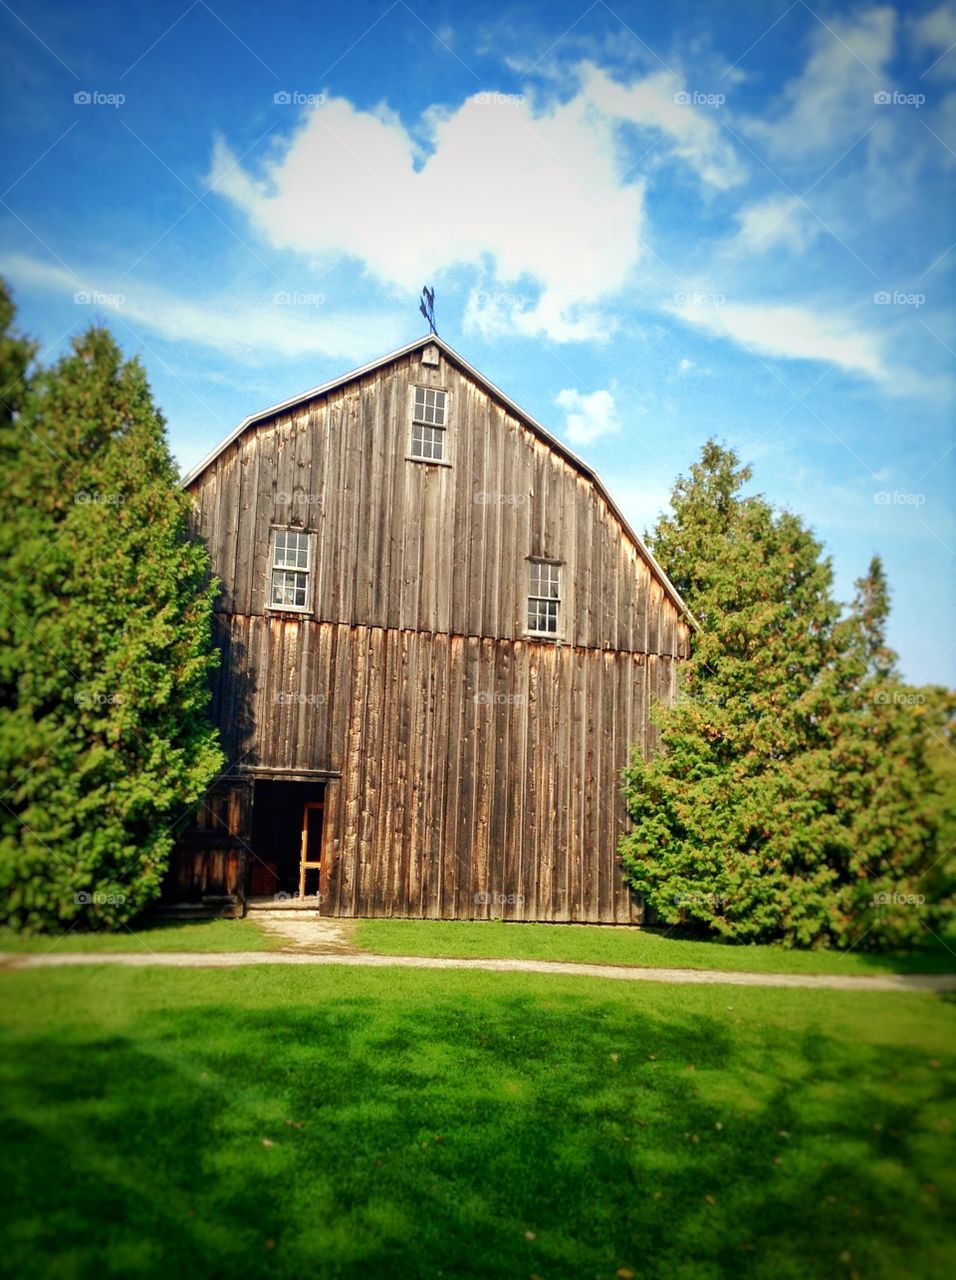 The barn . At the old homestead.